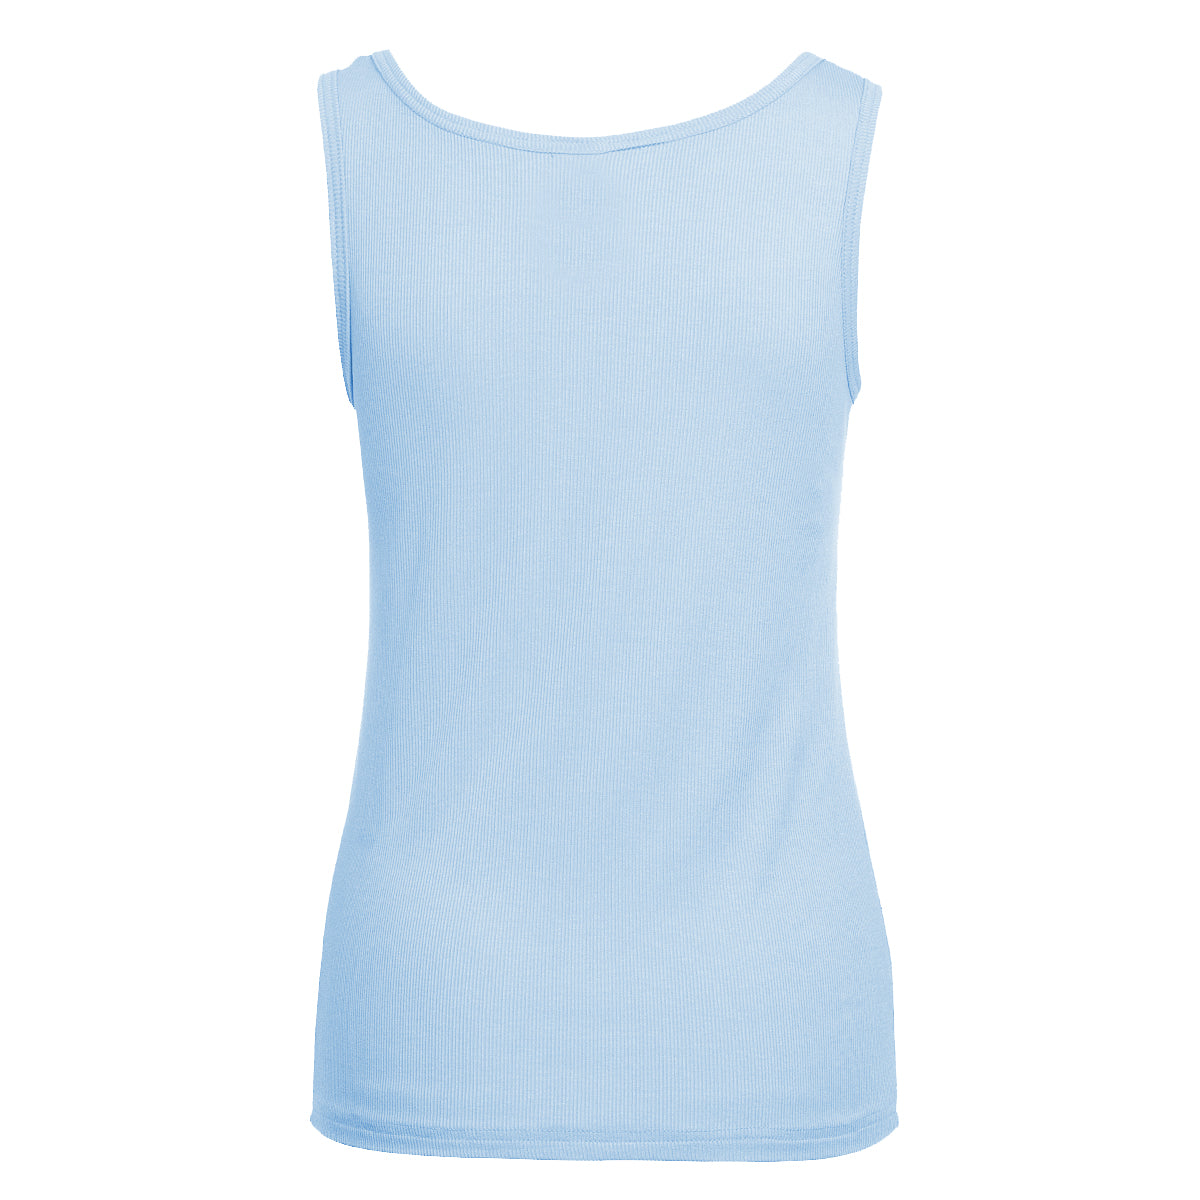 LUXZUZ // ONE TWO Adelina Top Top 506 Blue Bell